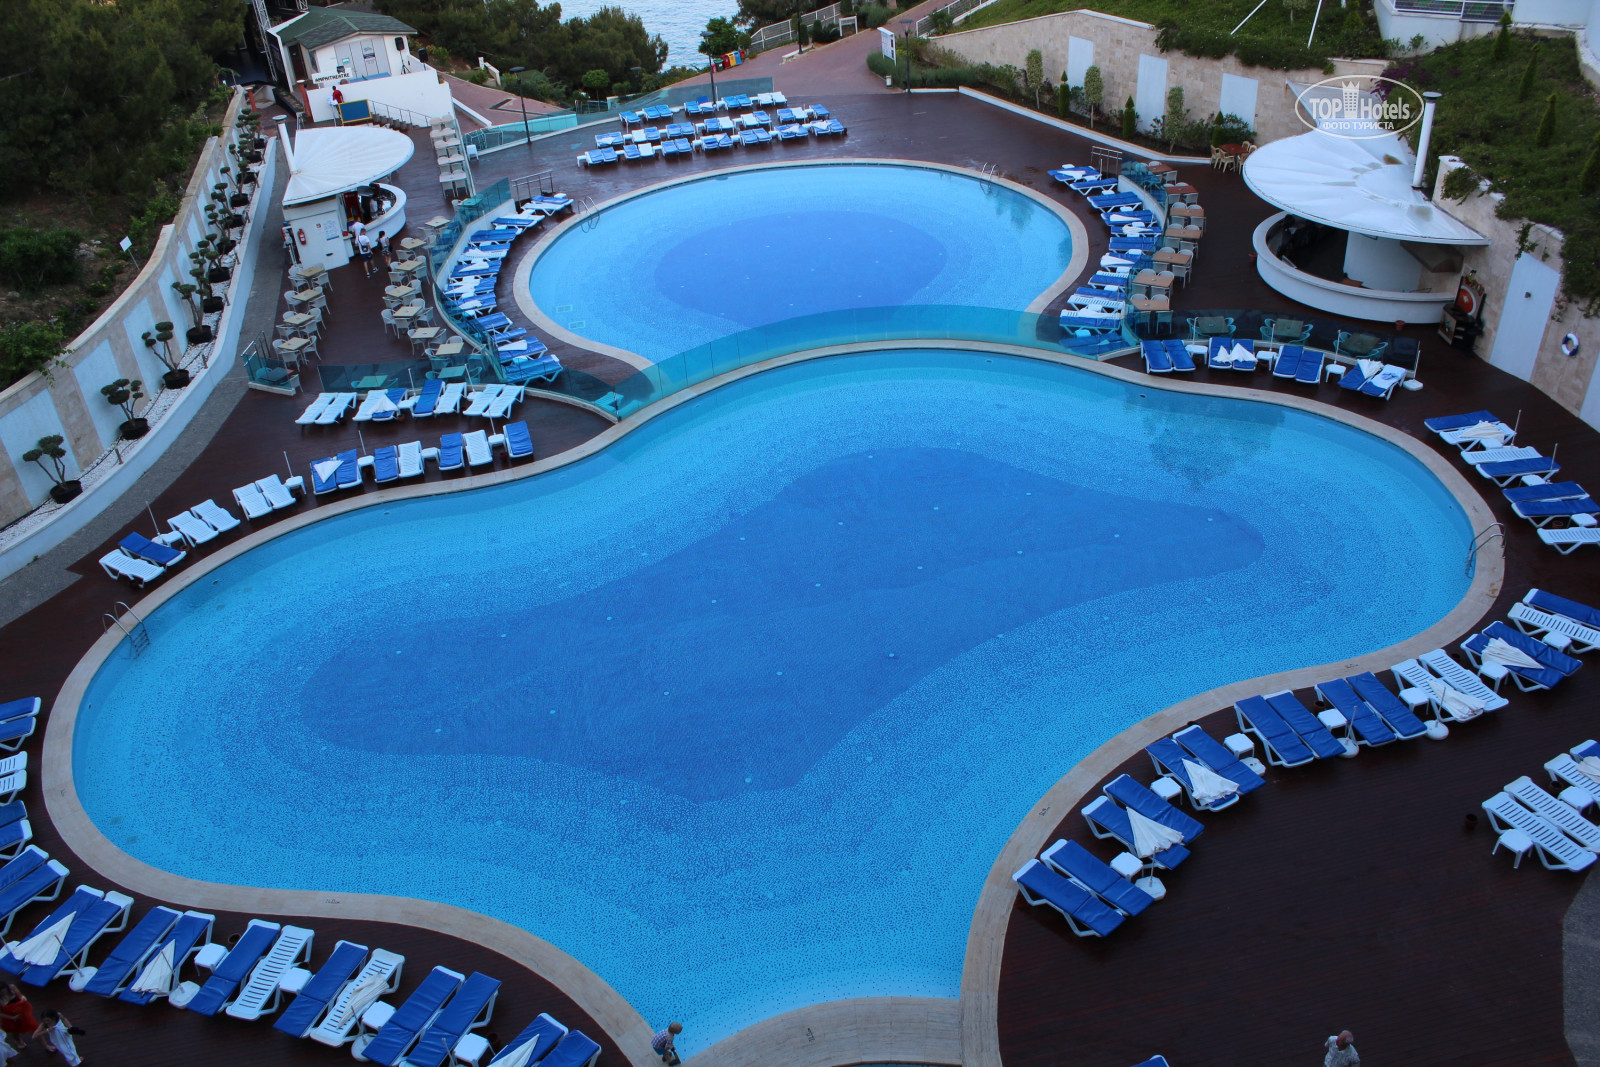 Life water planet. Water Planet Deluxe Hotel Aquapark 5. Отель Water Planet Deluxe Hotel & Aquapark. Water Planet Deluxe Hotel Aquapark 5 пляж. A good Life Water Planet 5 Турция.